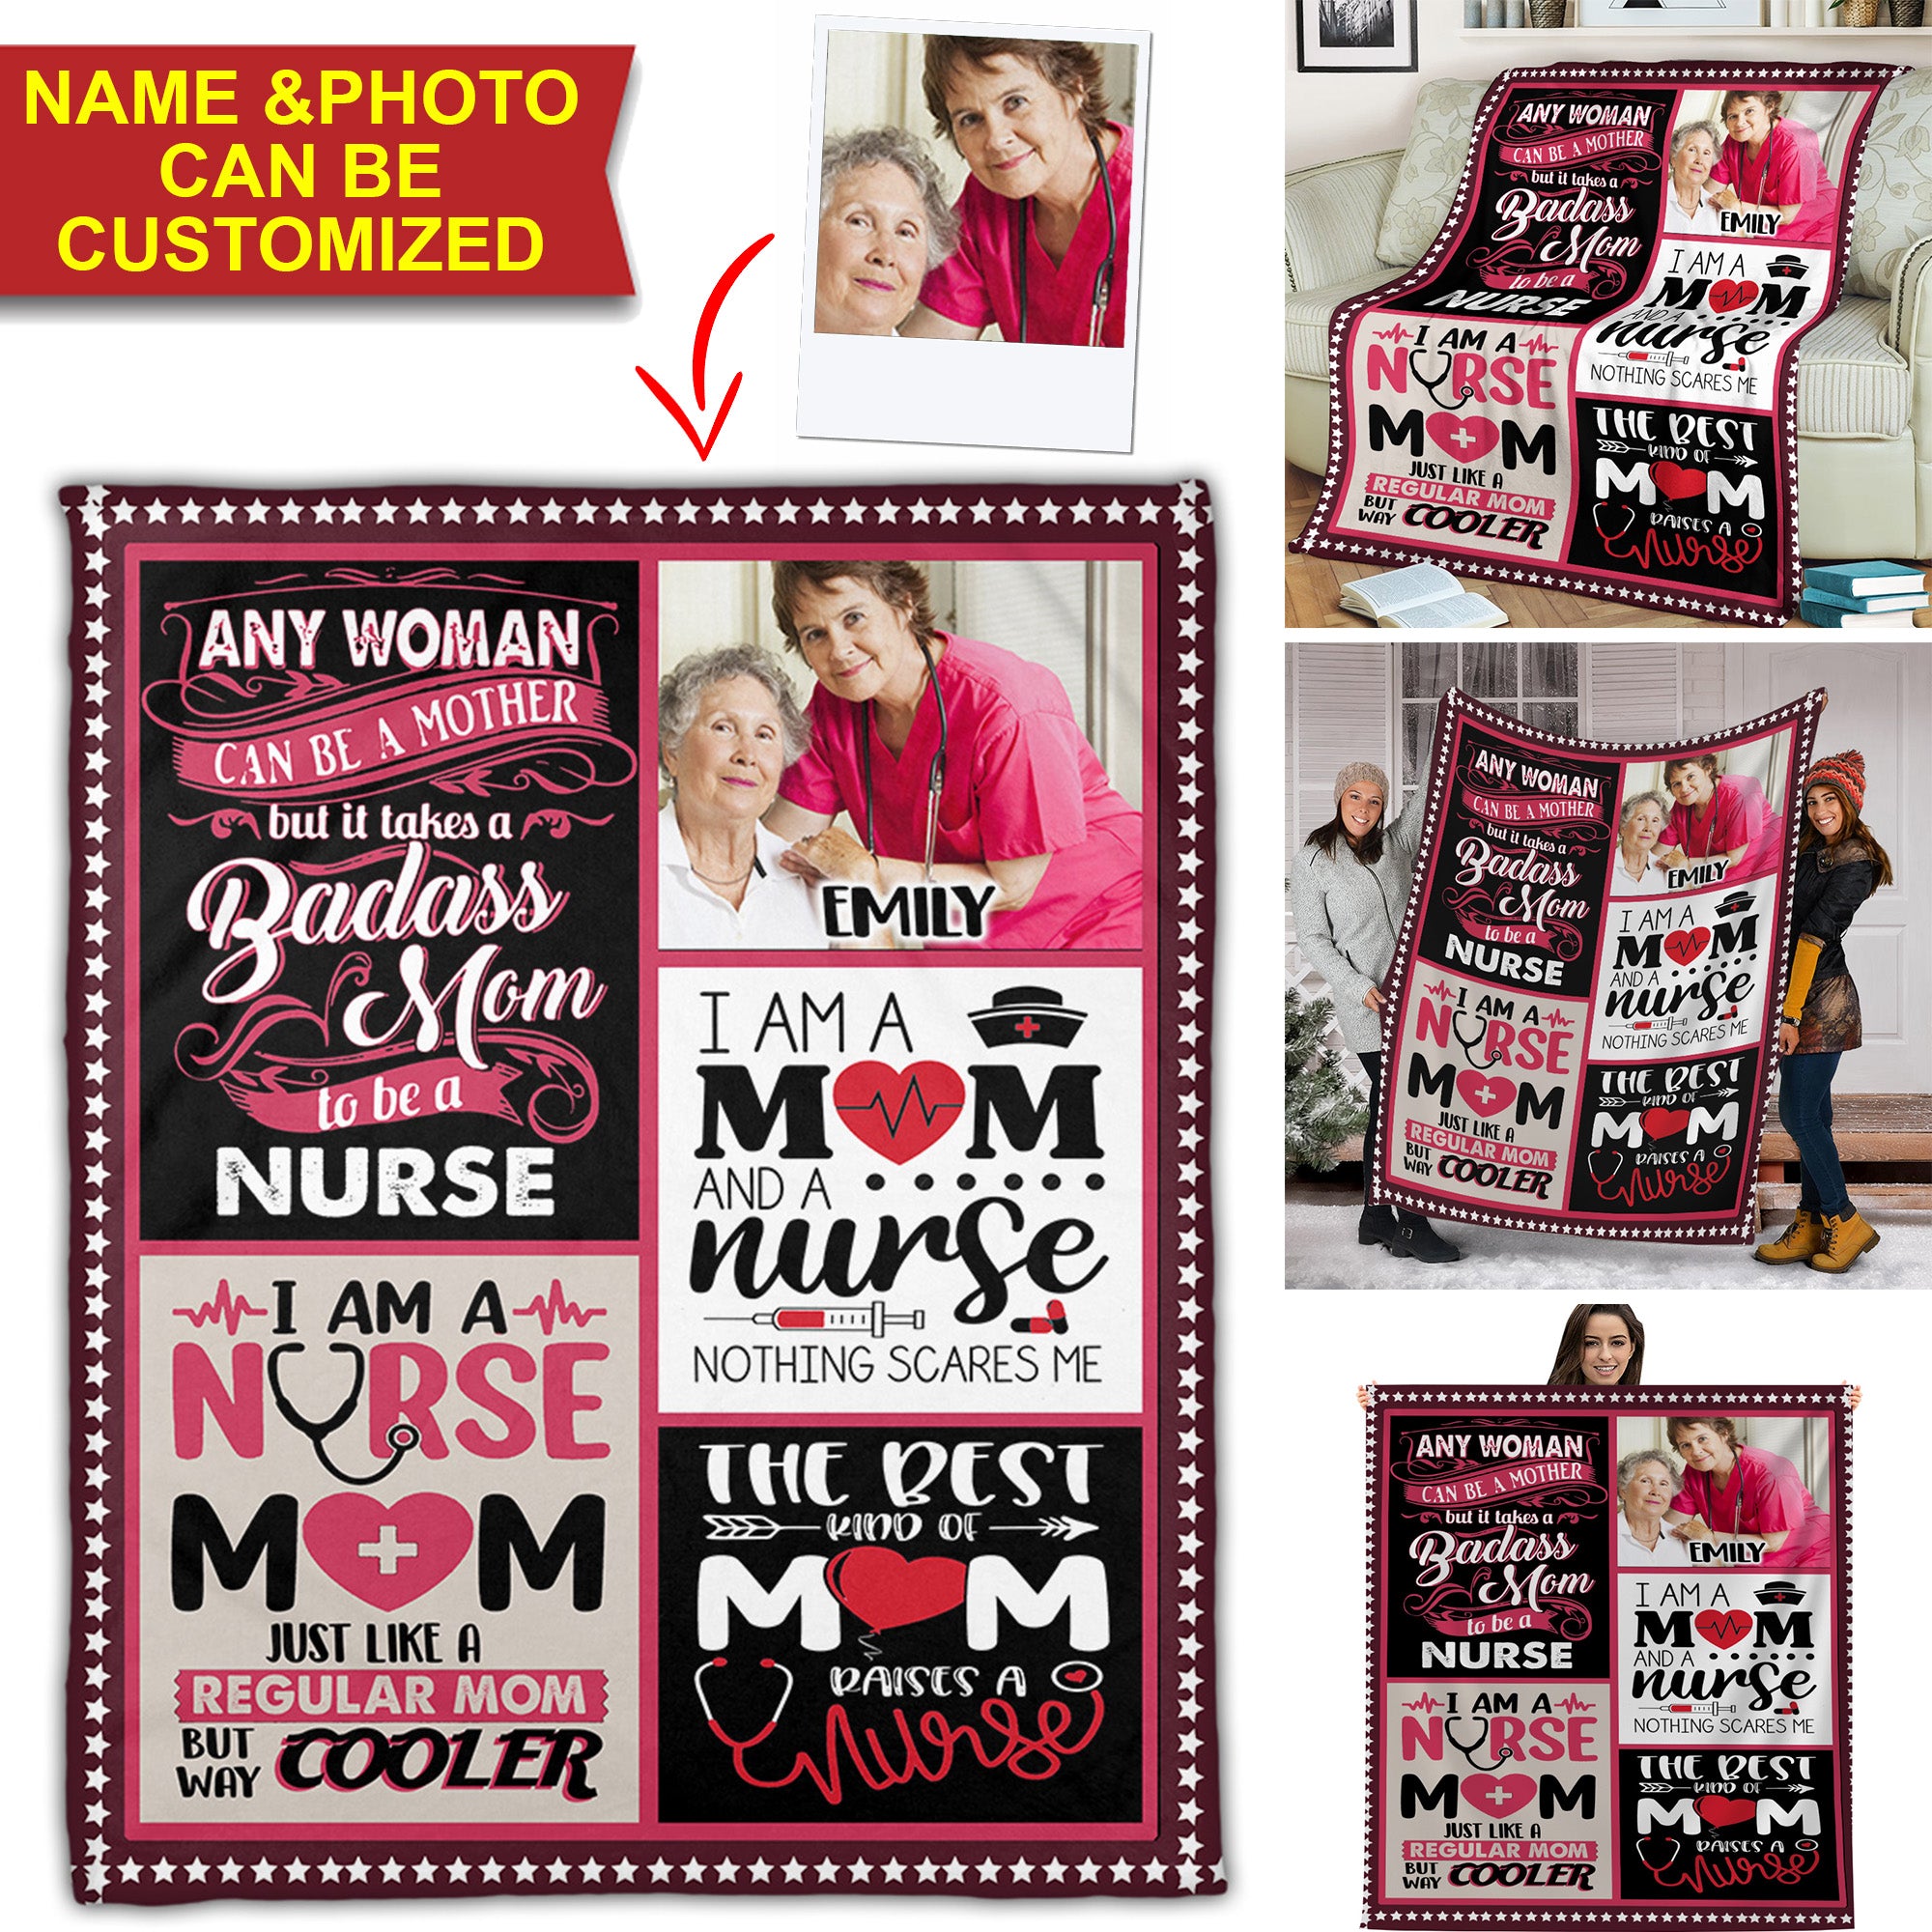 Any Woman Can Be A Mother But It Takes A Badass Mom To Be A Nurse - Custom Photo And Name - Personalized Fleece Blanket